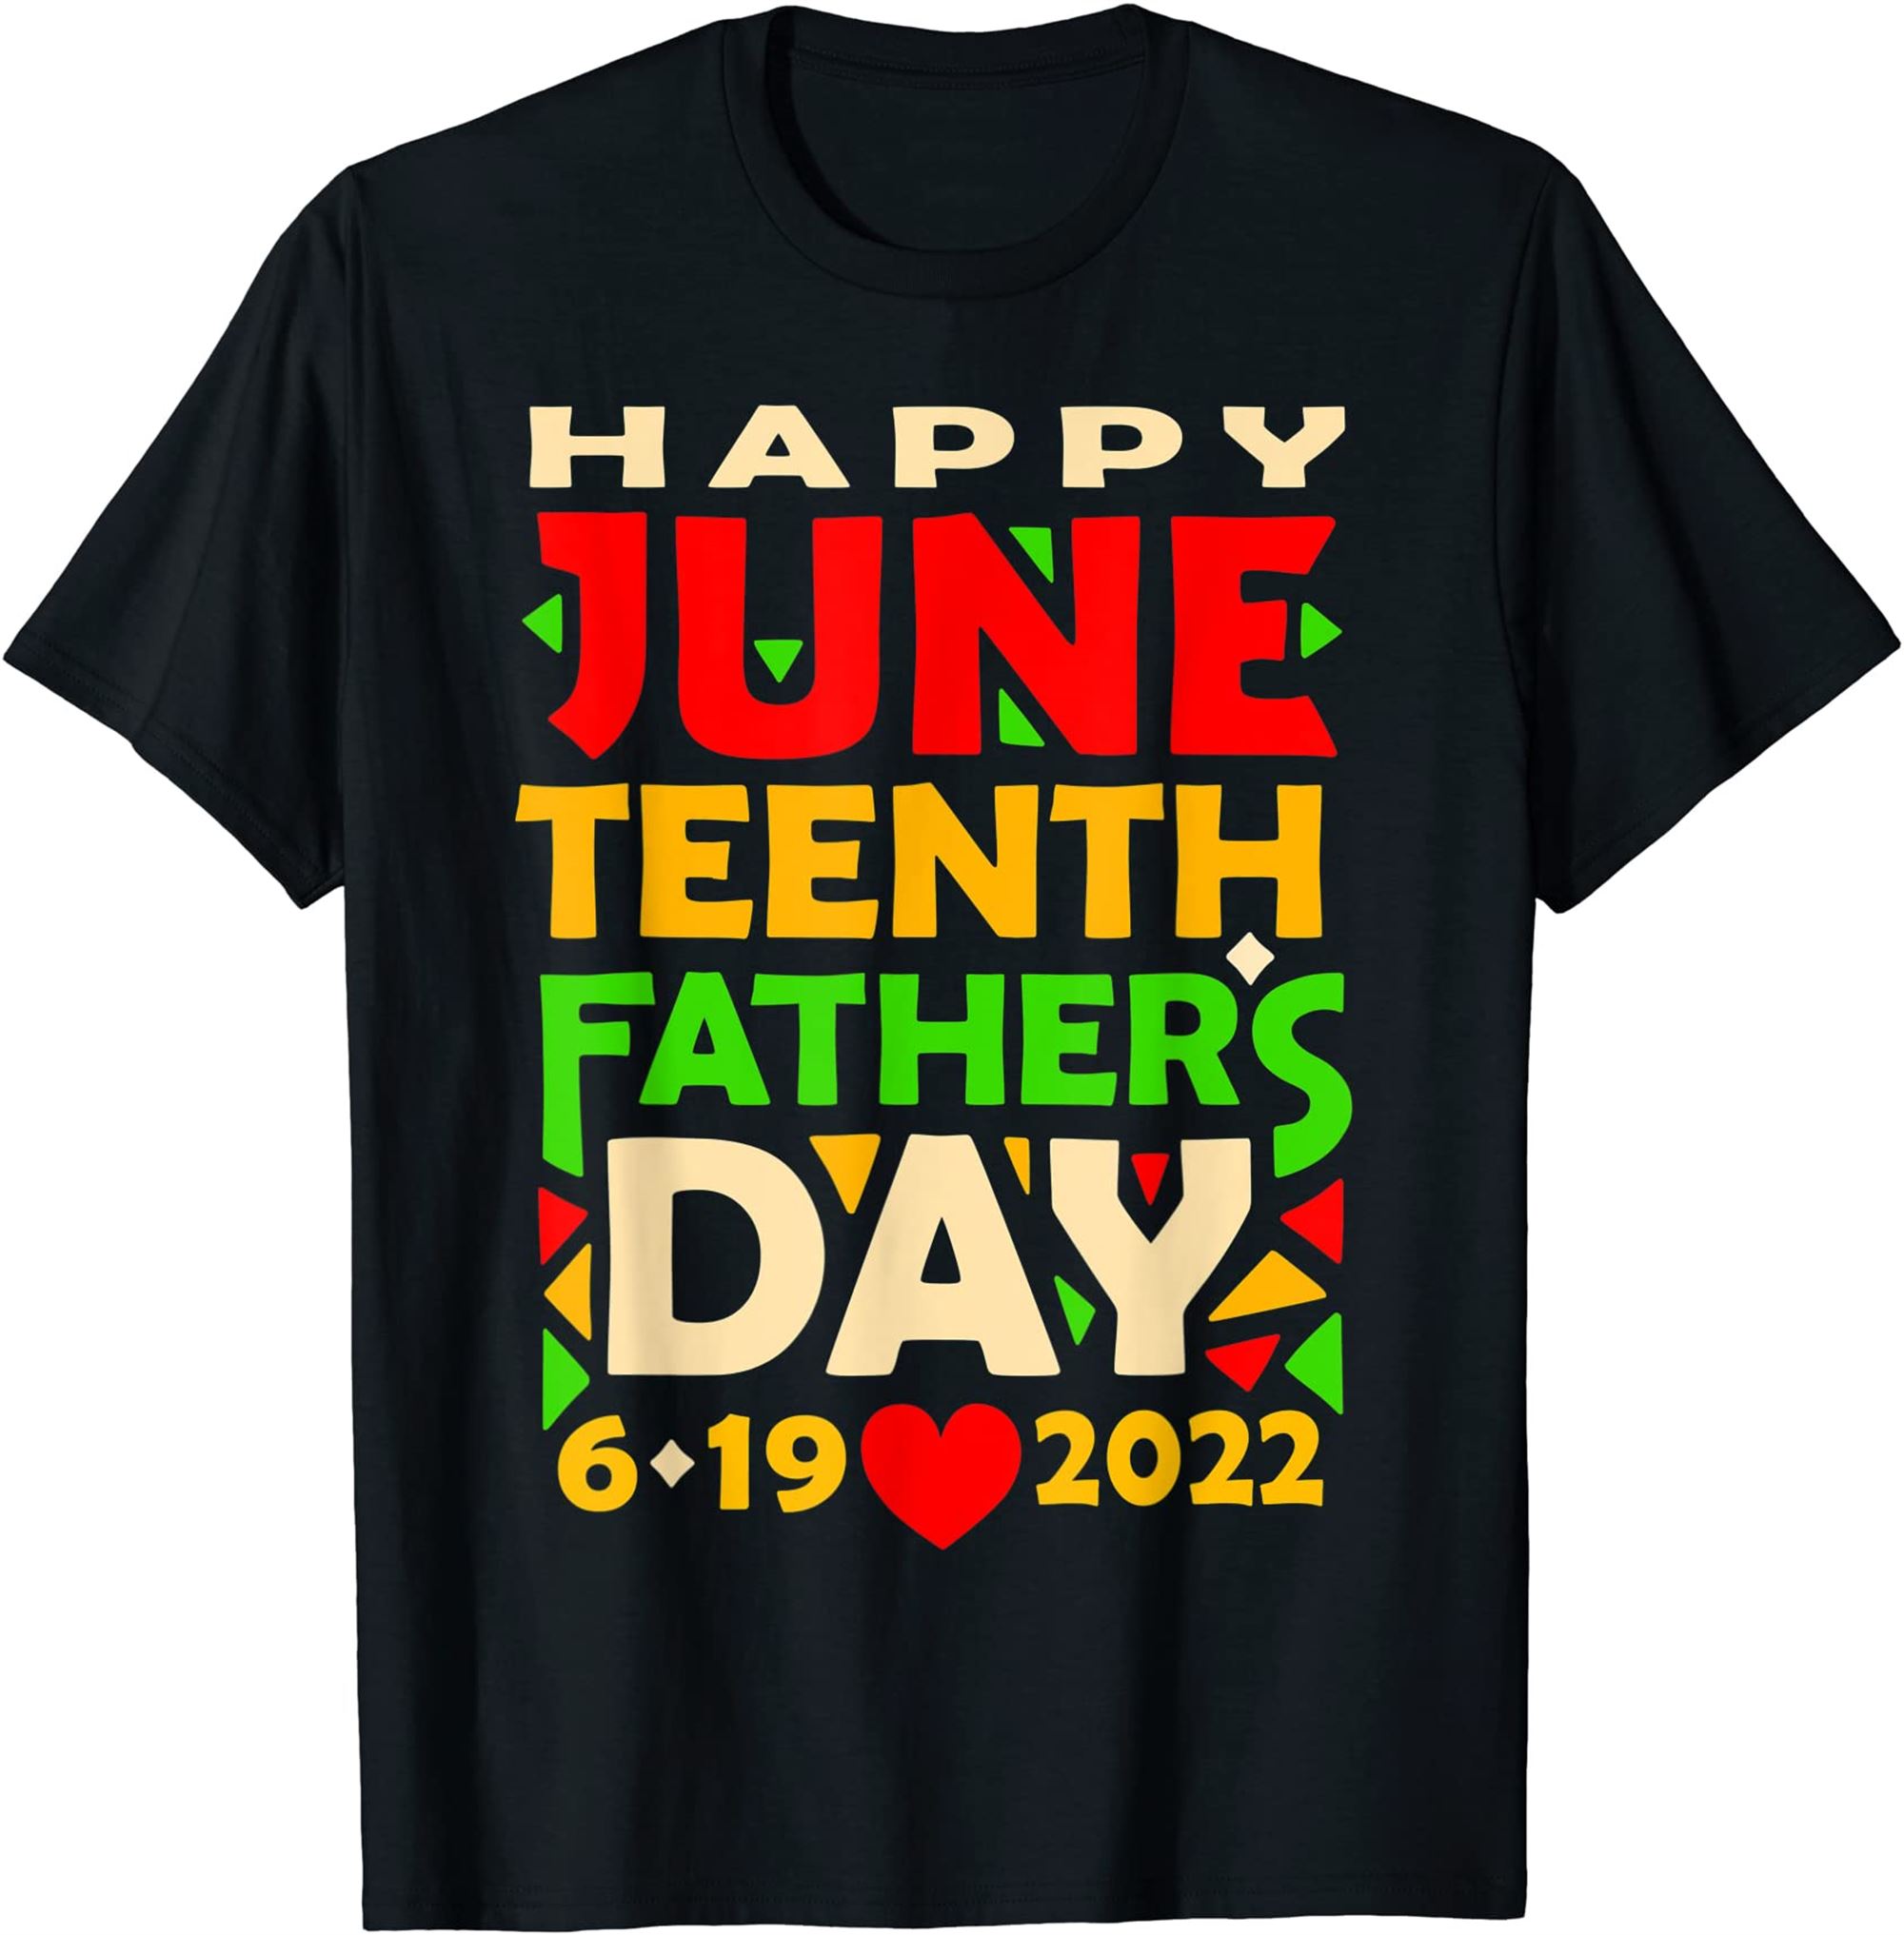 Juneteenth Fathers Day Black Dad Happy Holiday Celebration T-shirt Plus Size Up To 5xl